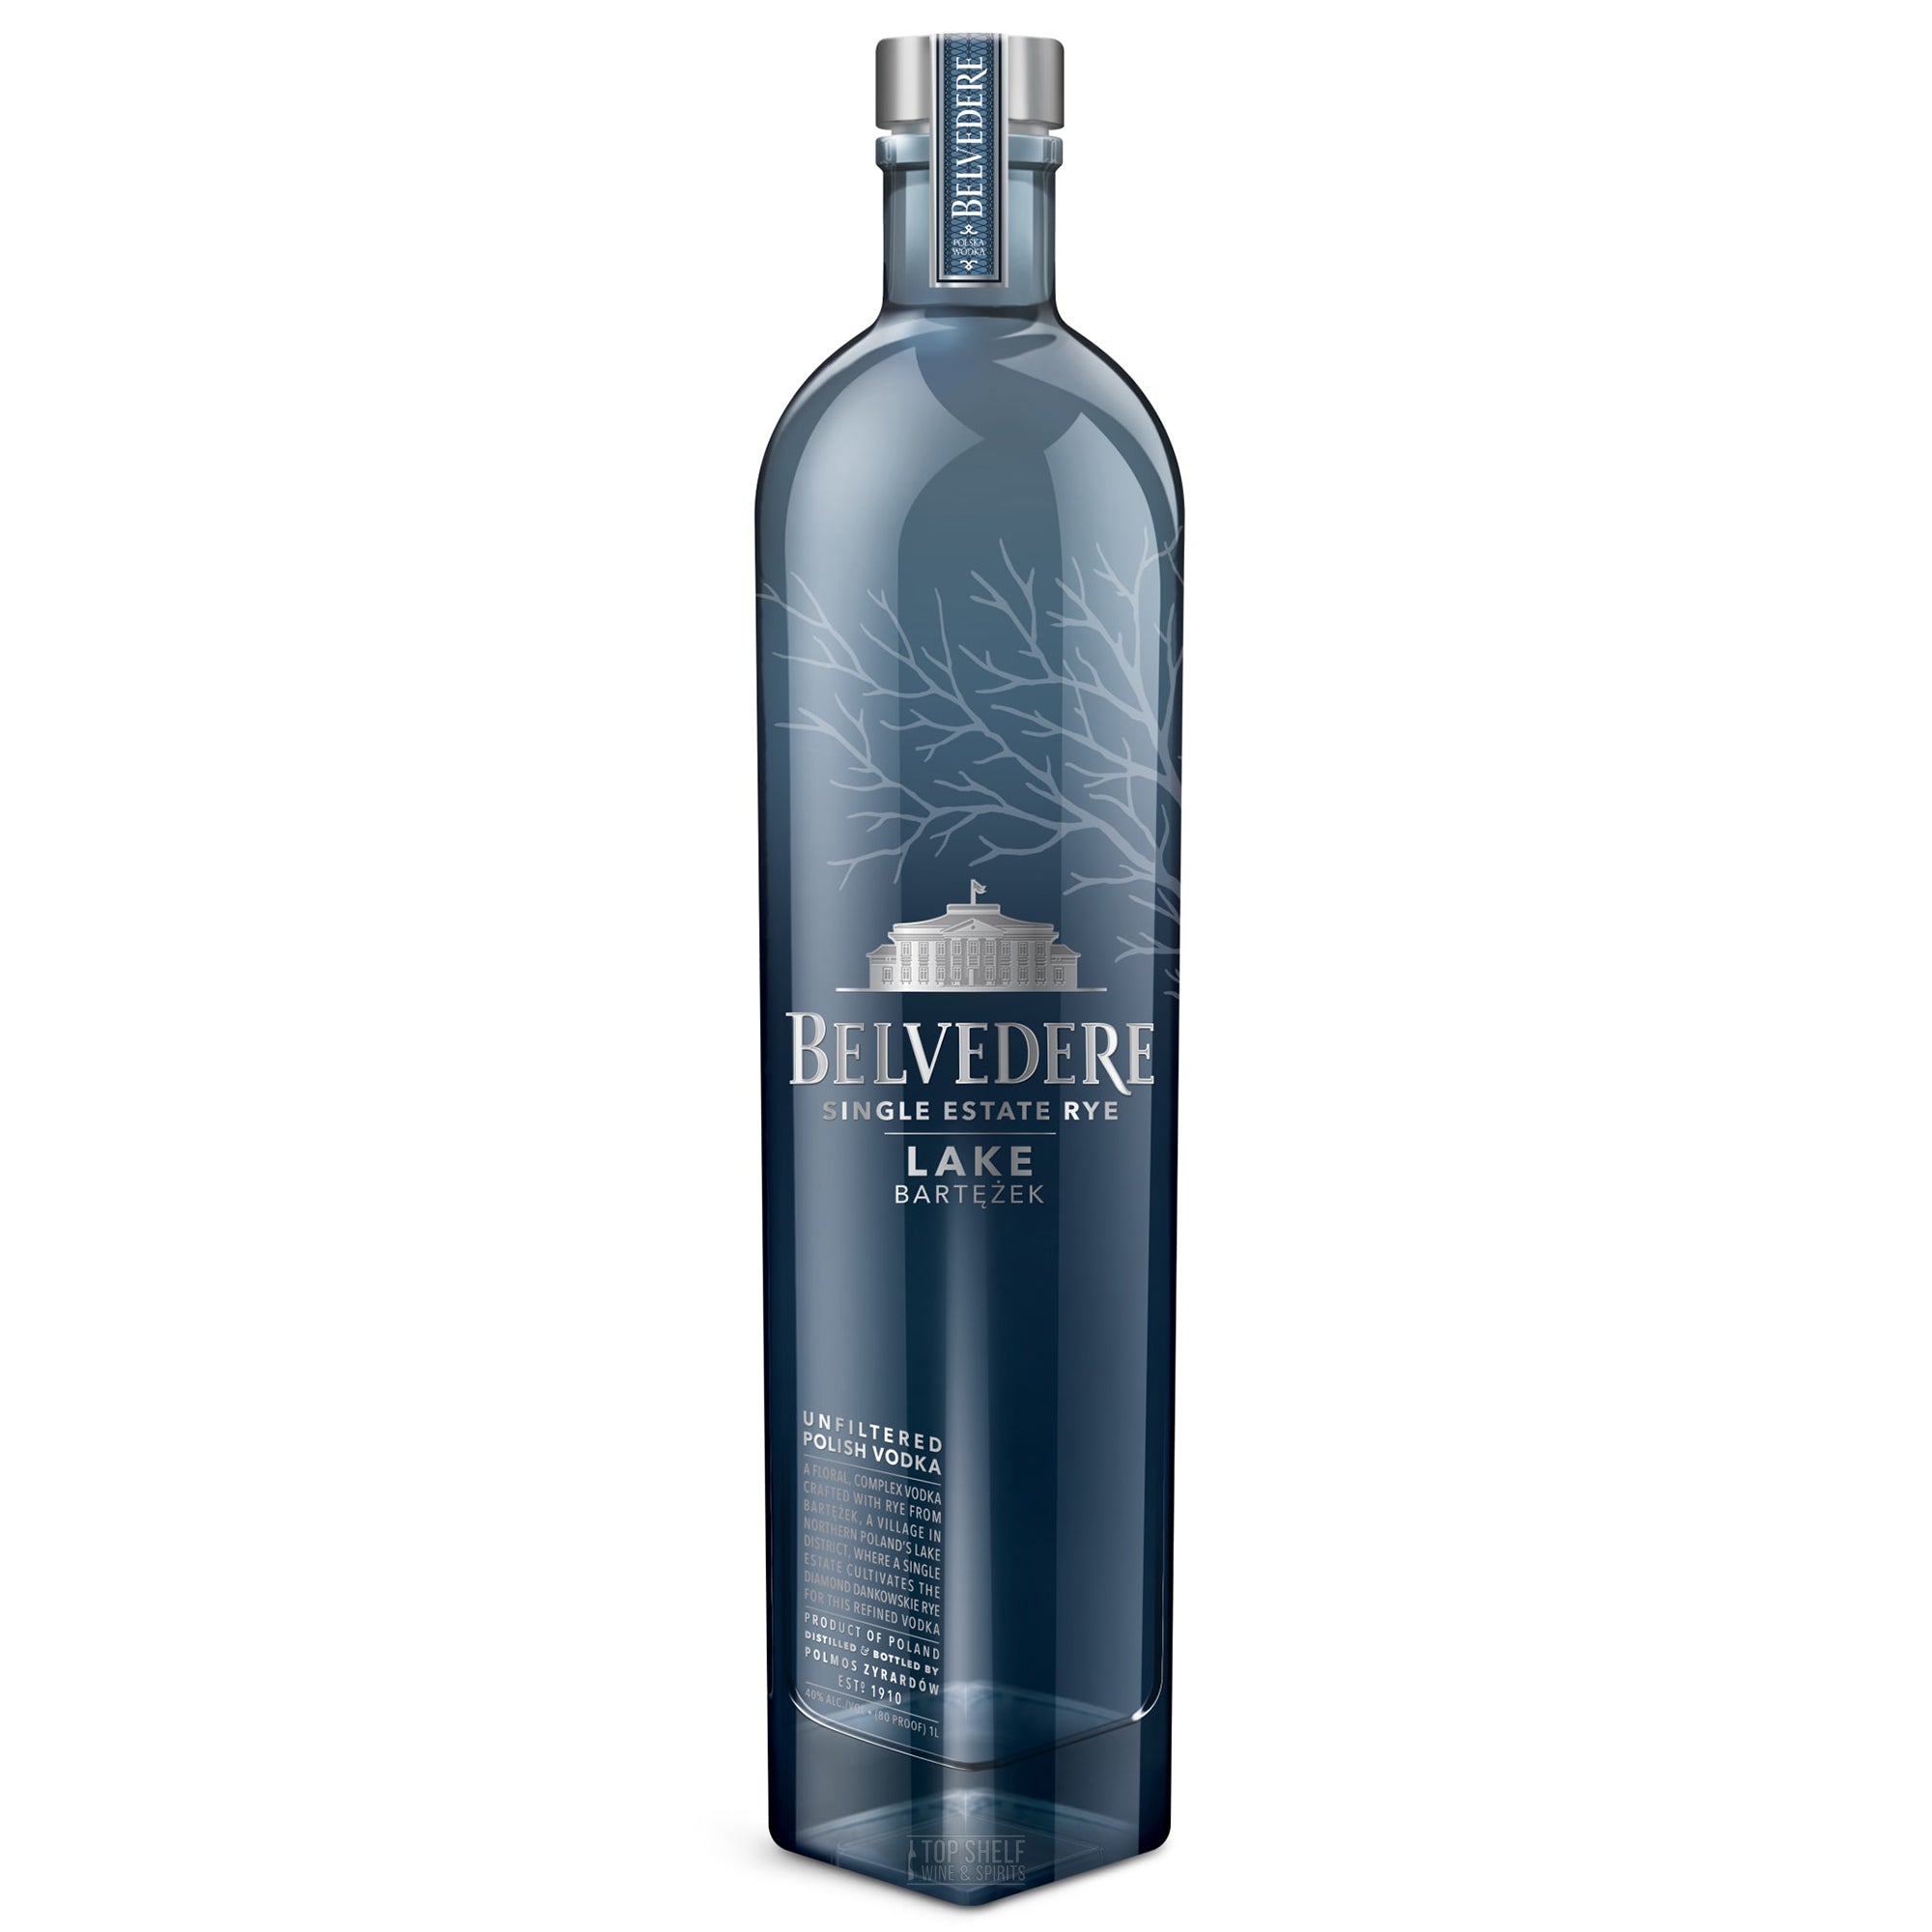 BELVEDERE VODKA 1.75L - The best selection and prices for Wine